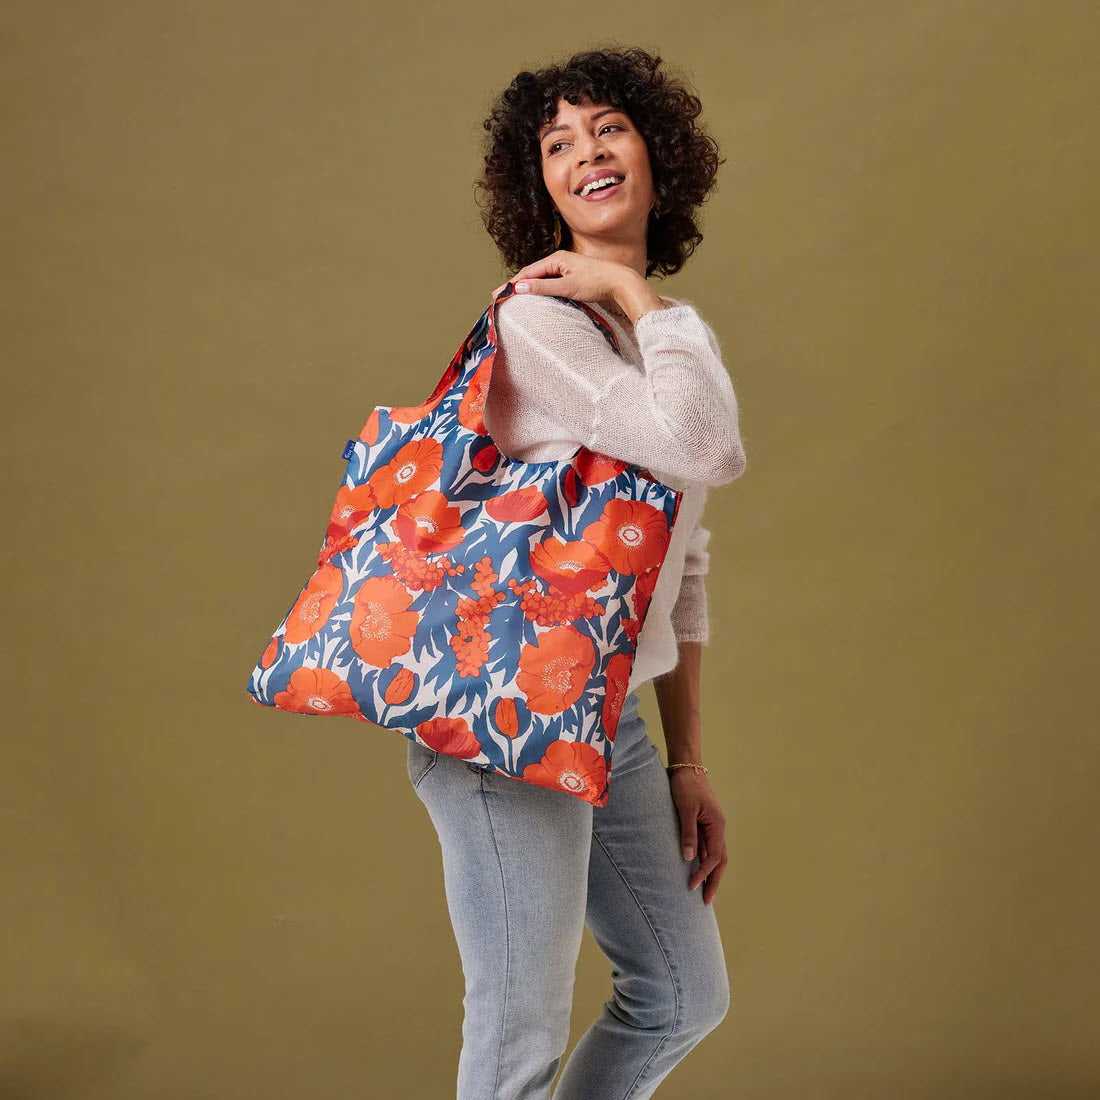 A woman with curly hair, smiling, holding a large eco-friendly Rockflowerpaper BLU BAG ICELANDIC POPPIES, wearing a beige sweater and jeans against a tan background.